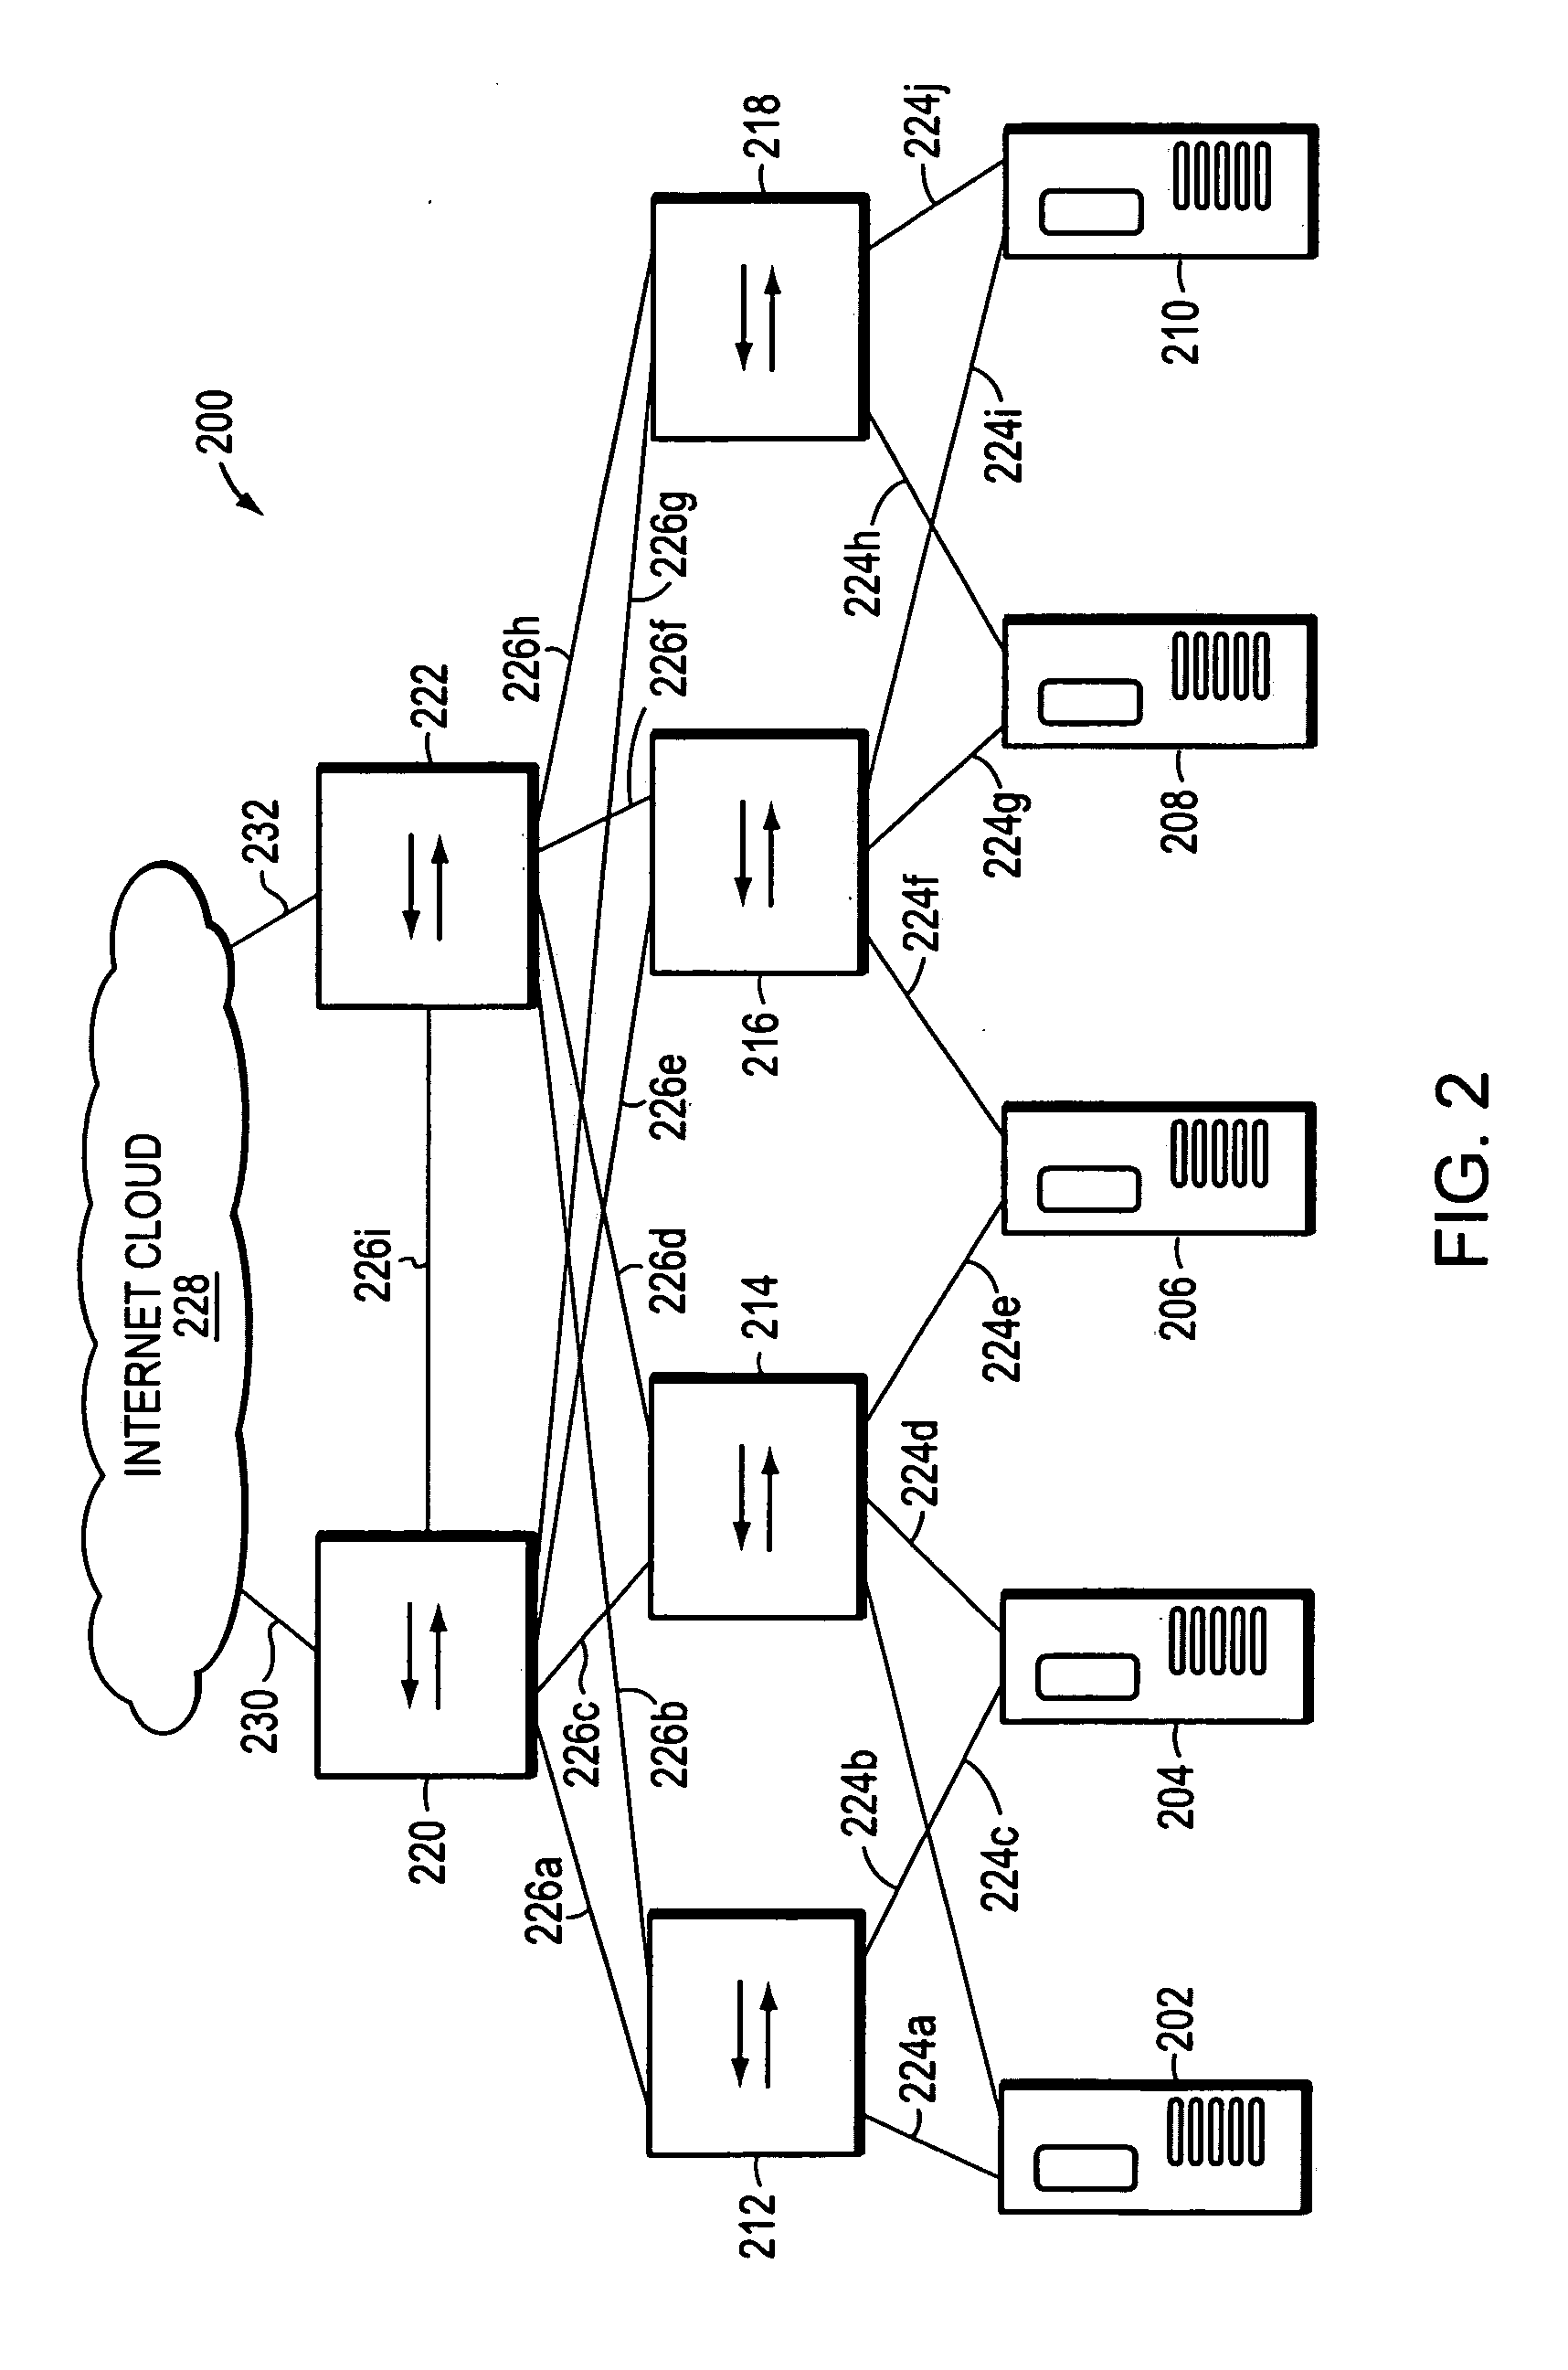 Hierarchical associative memory-based classification system